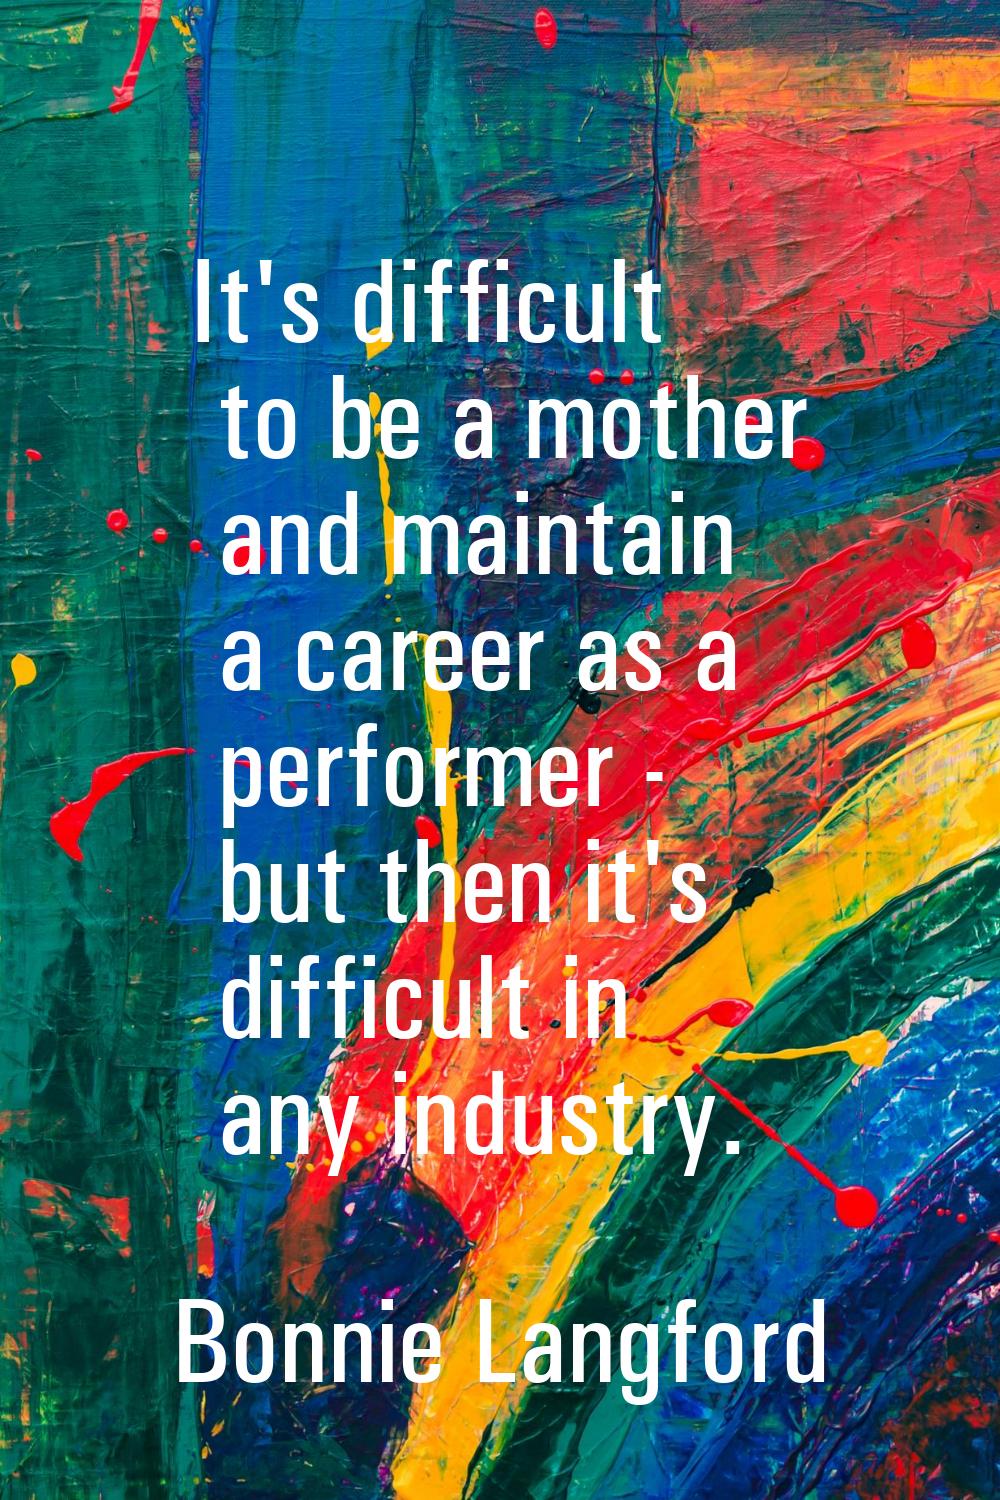 It's difficult to be a mother and maintain a career as a performer - but then it's difficult in any